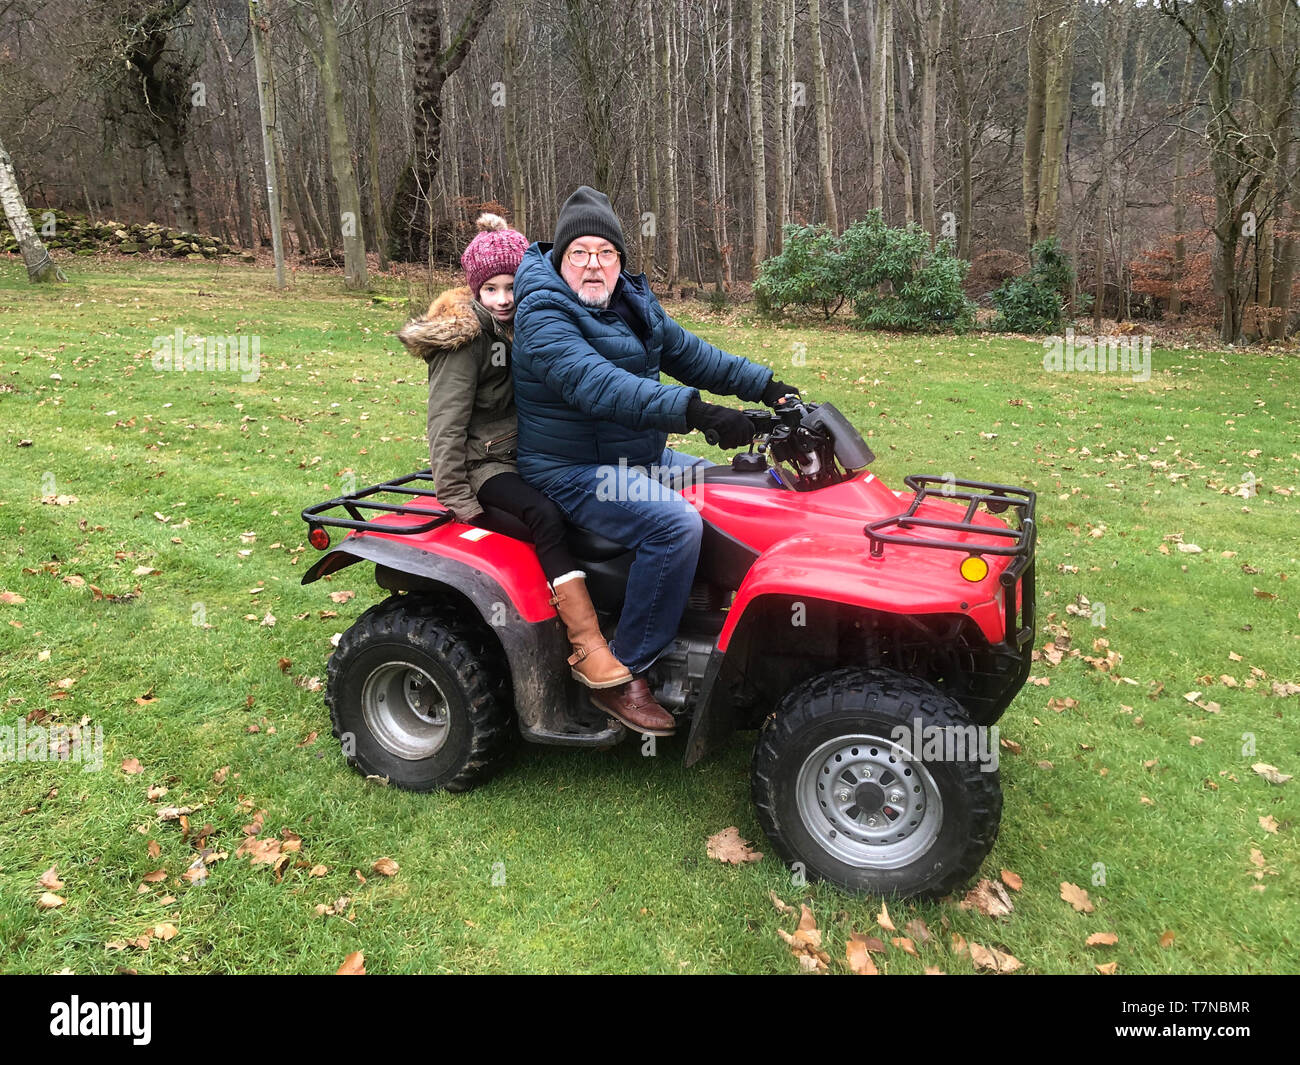 Litle girl is riding on a quad with her father, they are both looking at the camera. Stock Photo